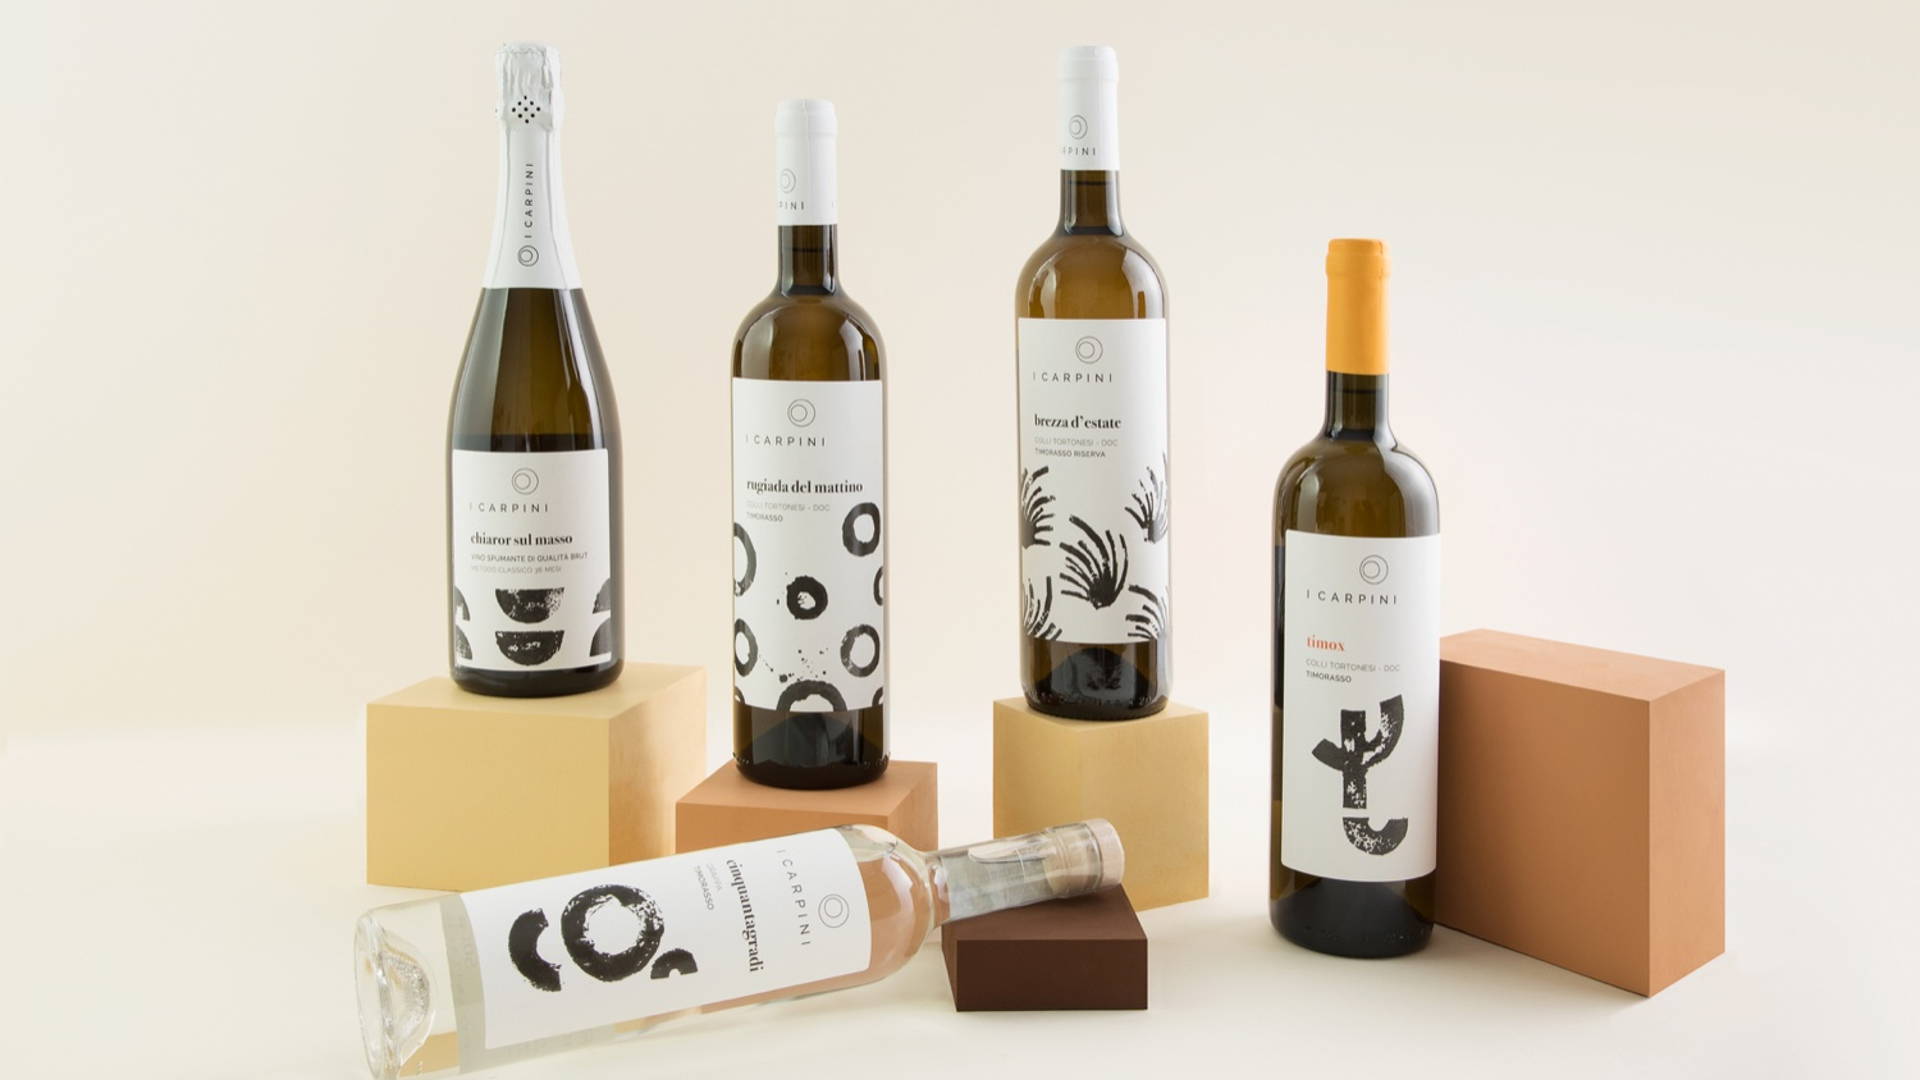 Featured image for I Carpini Brand Identity Communicates The Poetry Behind Their Wines